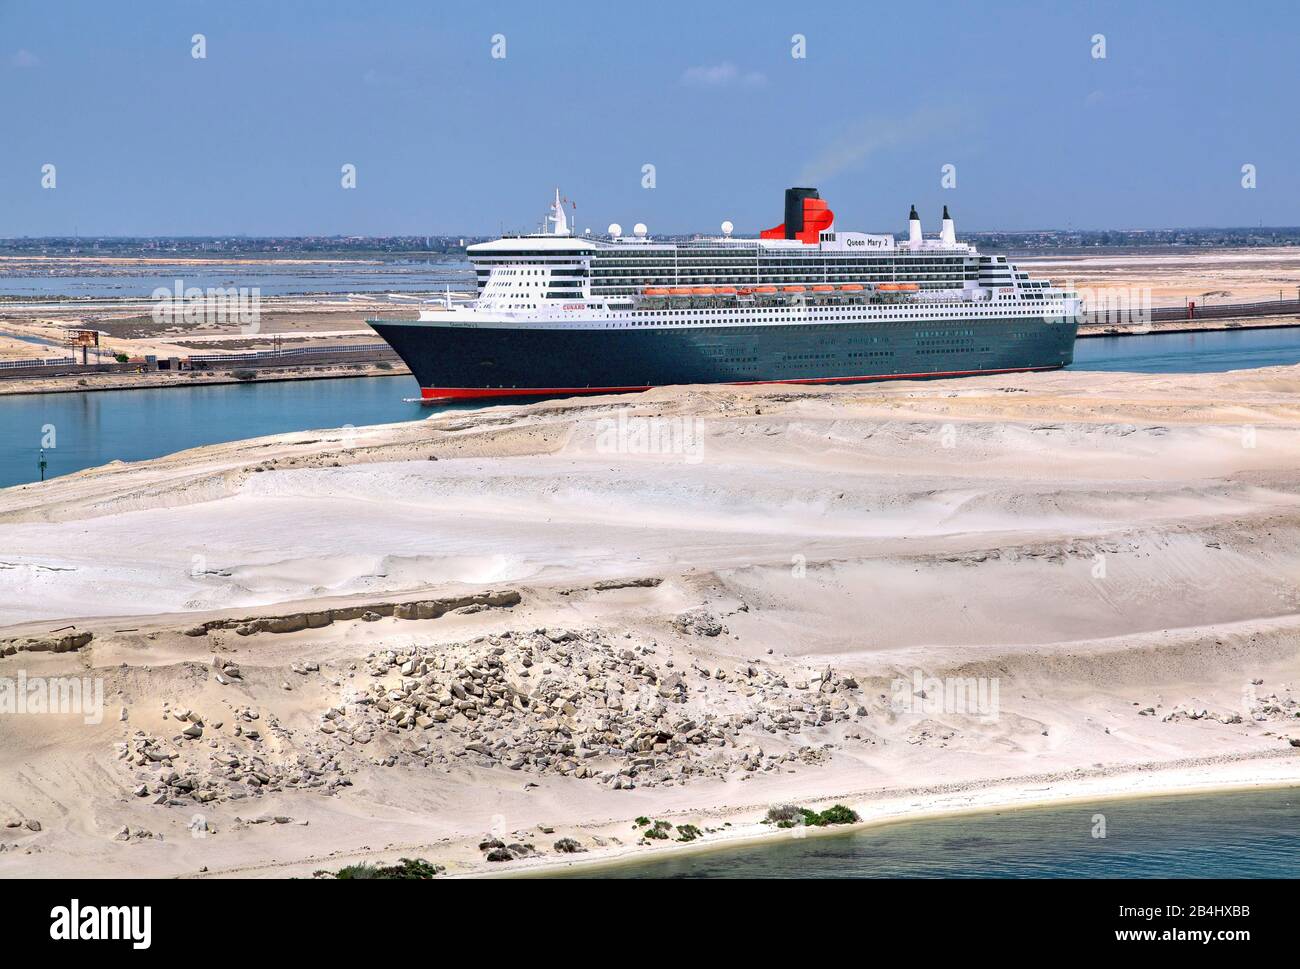 Transatlantic liner Queen Mary 2 in the Suez Canal (Suez Canal), Egypt Stock Photo